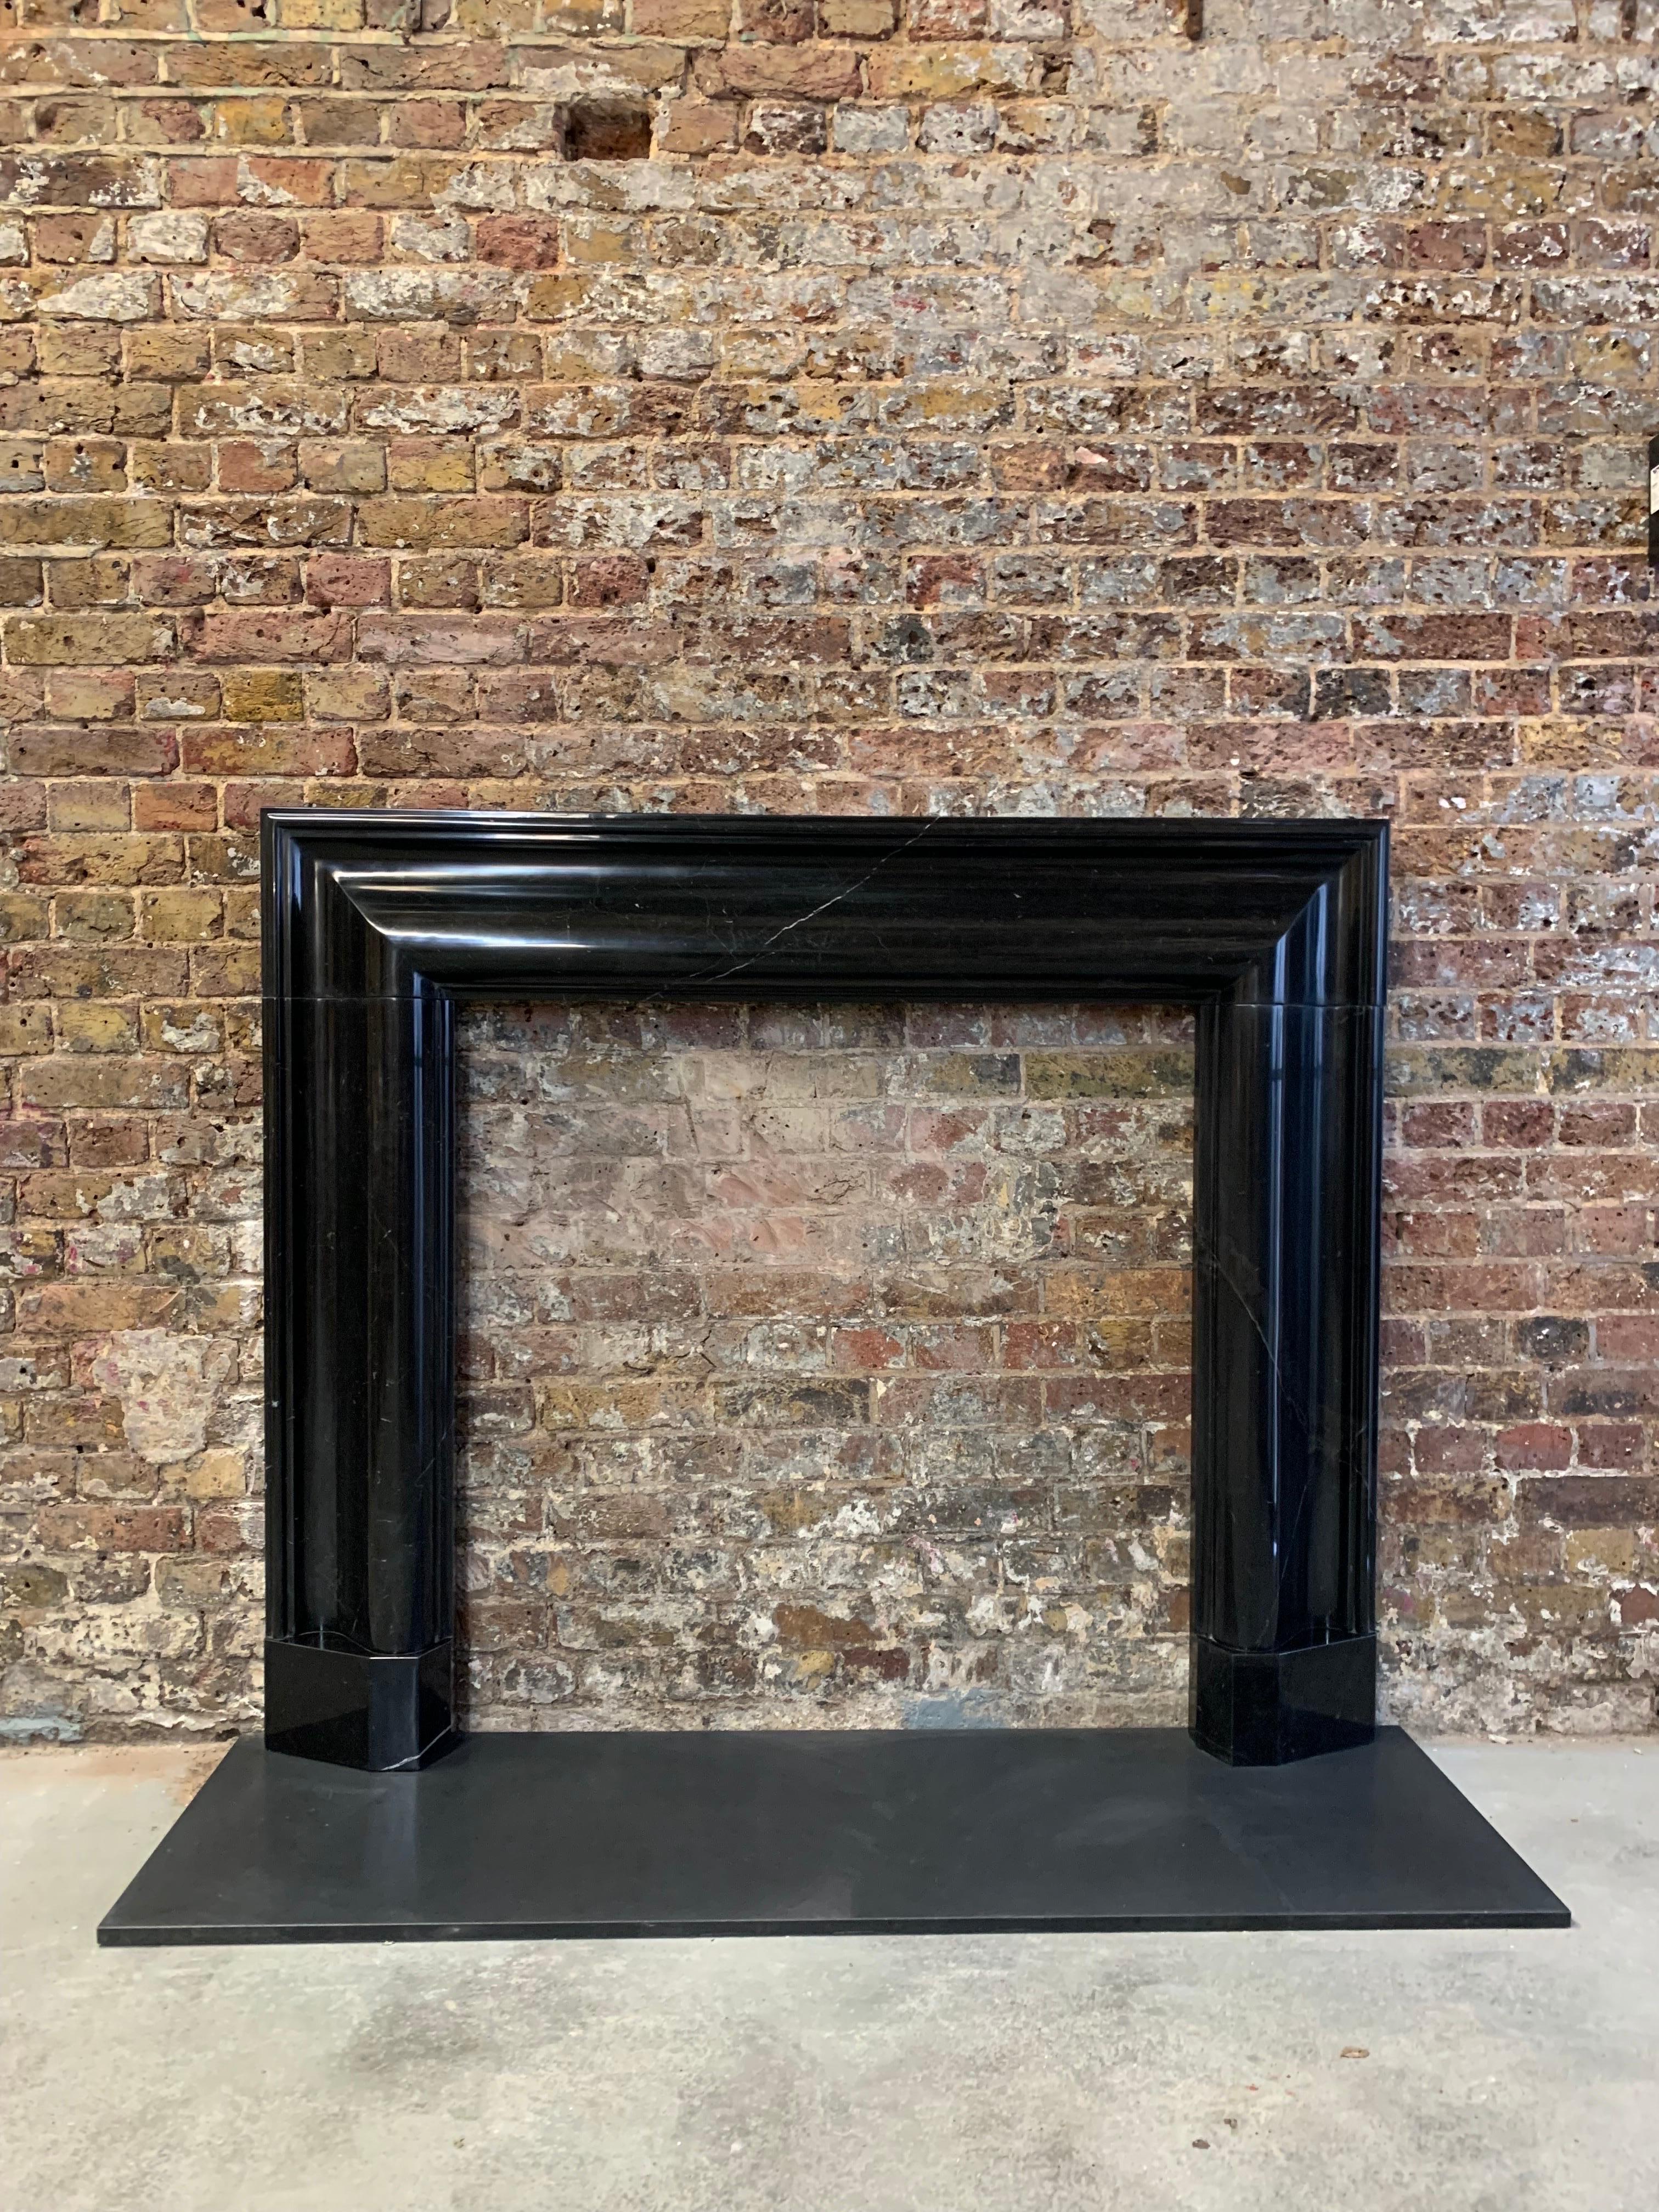 21st Century Nero Marquina Marble Fireplace Mantlepiece.
This Fine Bolection Hand Carved Marble Example Made To Original Georgian Design,
This Was Recently Made For A Very Well Known 5 Star Hotel Entrance Near Buckingham Palace London.
The Clients